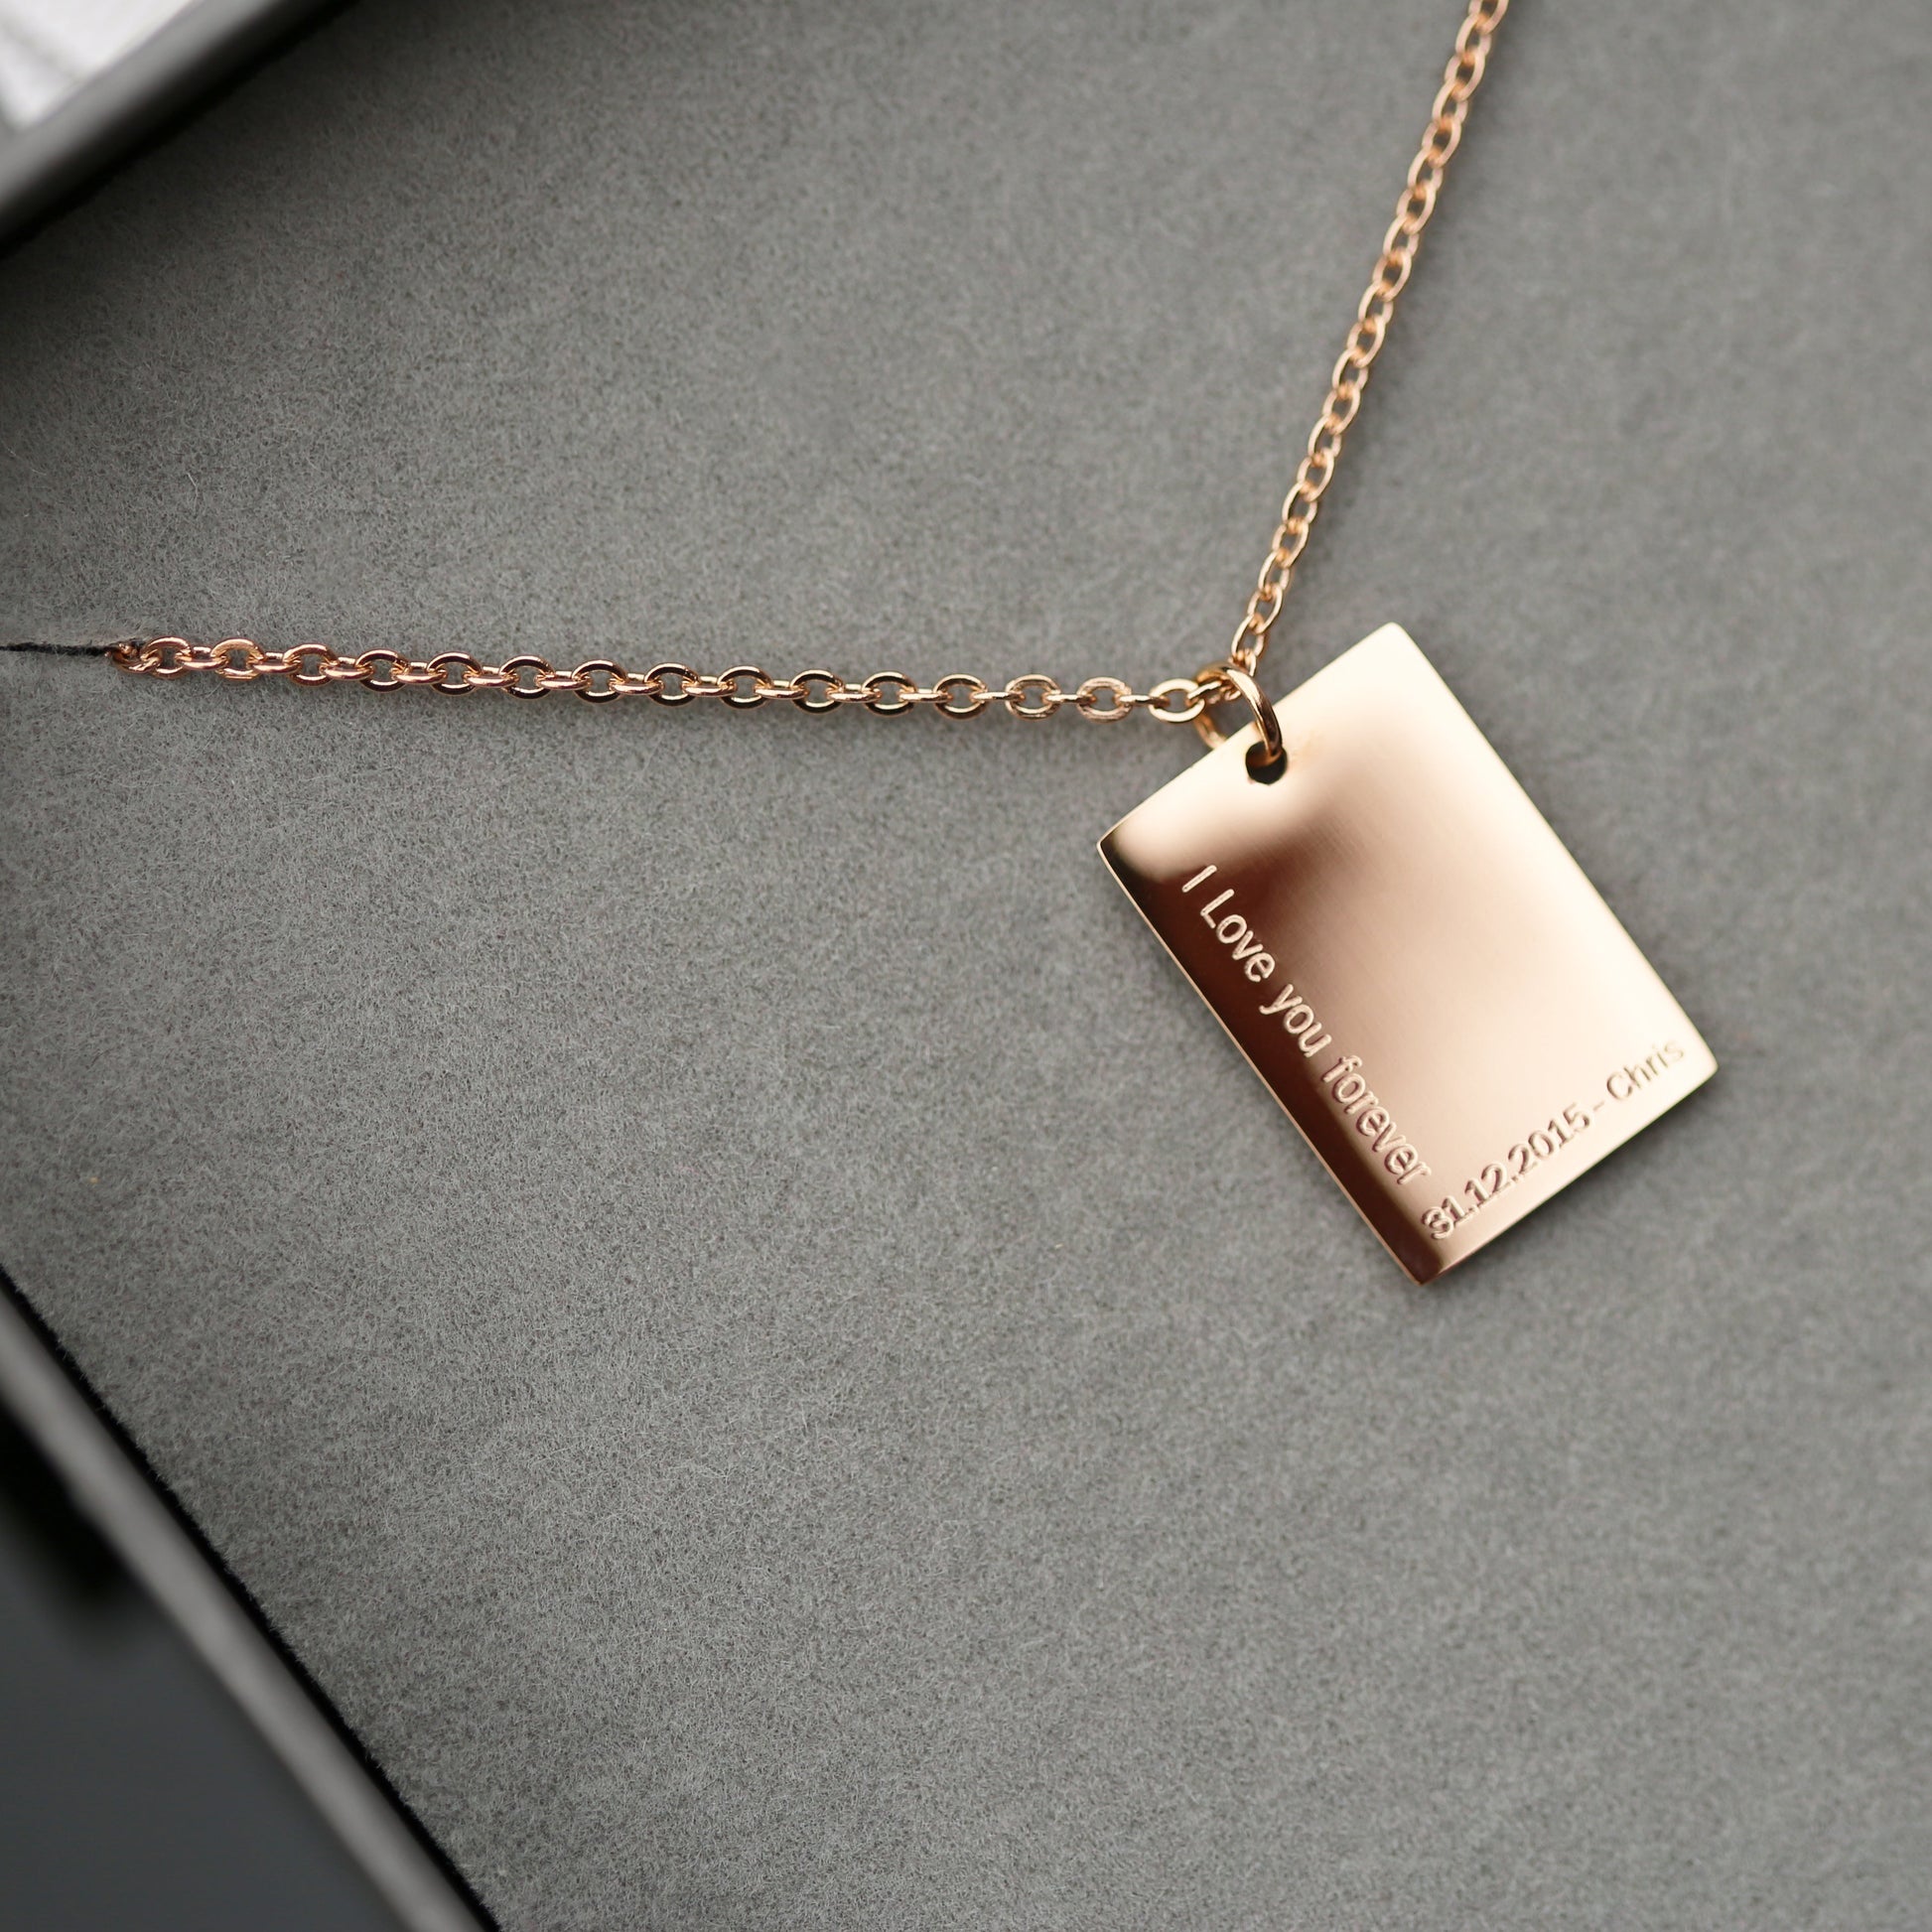 Personalized Necklaces - Dazzle Personalized Necklace - Modern Font Engraving 